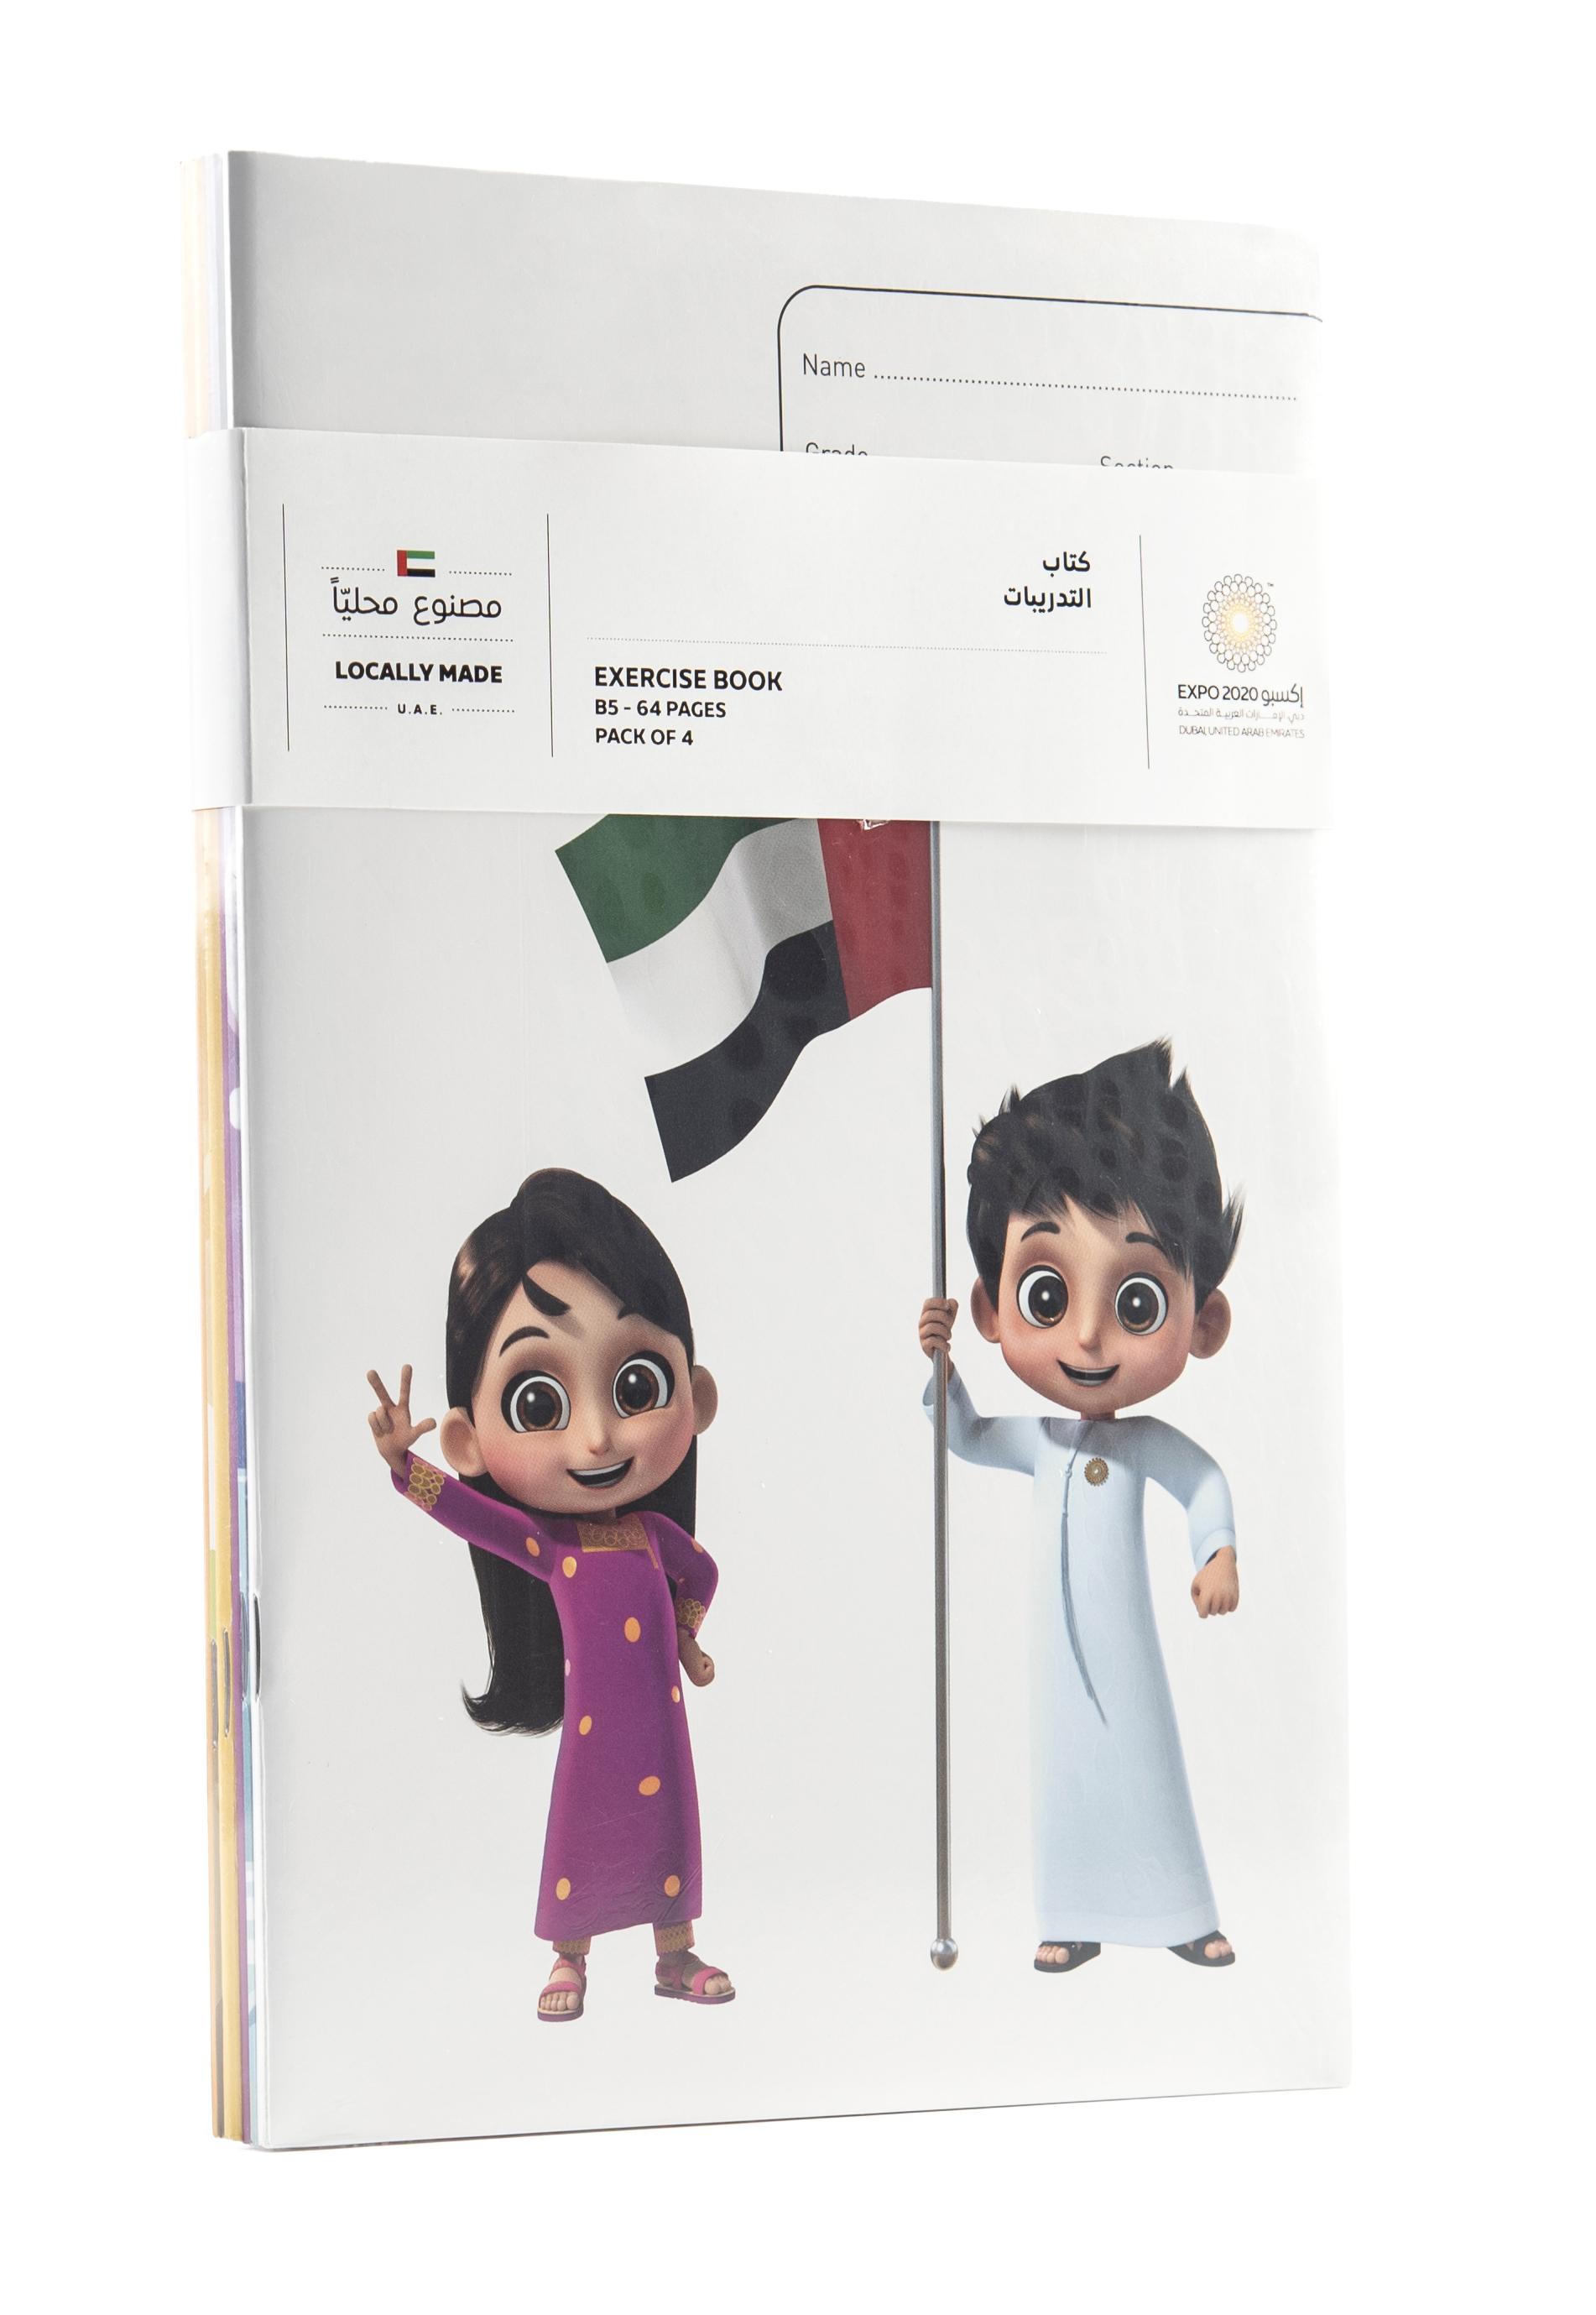 Expo 2020 Dubai Mascots B5 Exercise Books Pack of 4 - 64 Pages